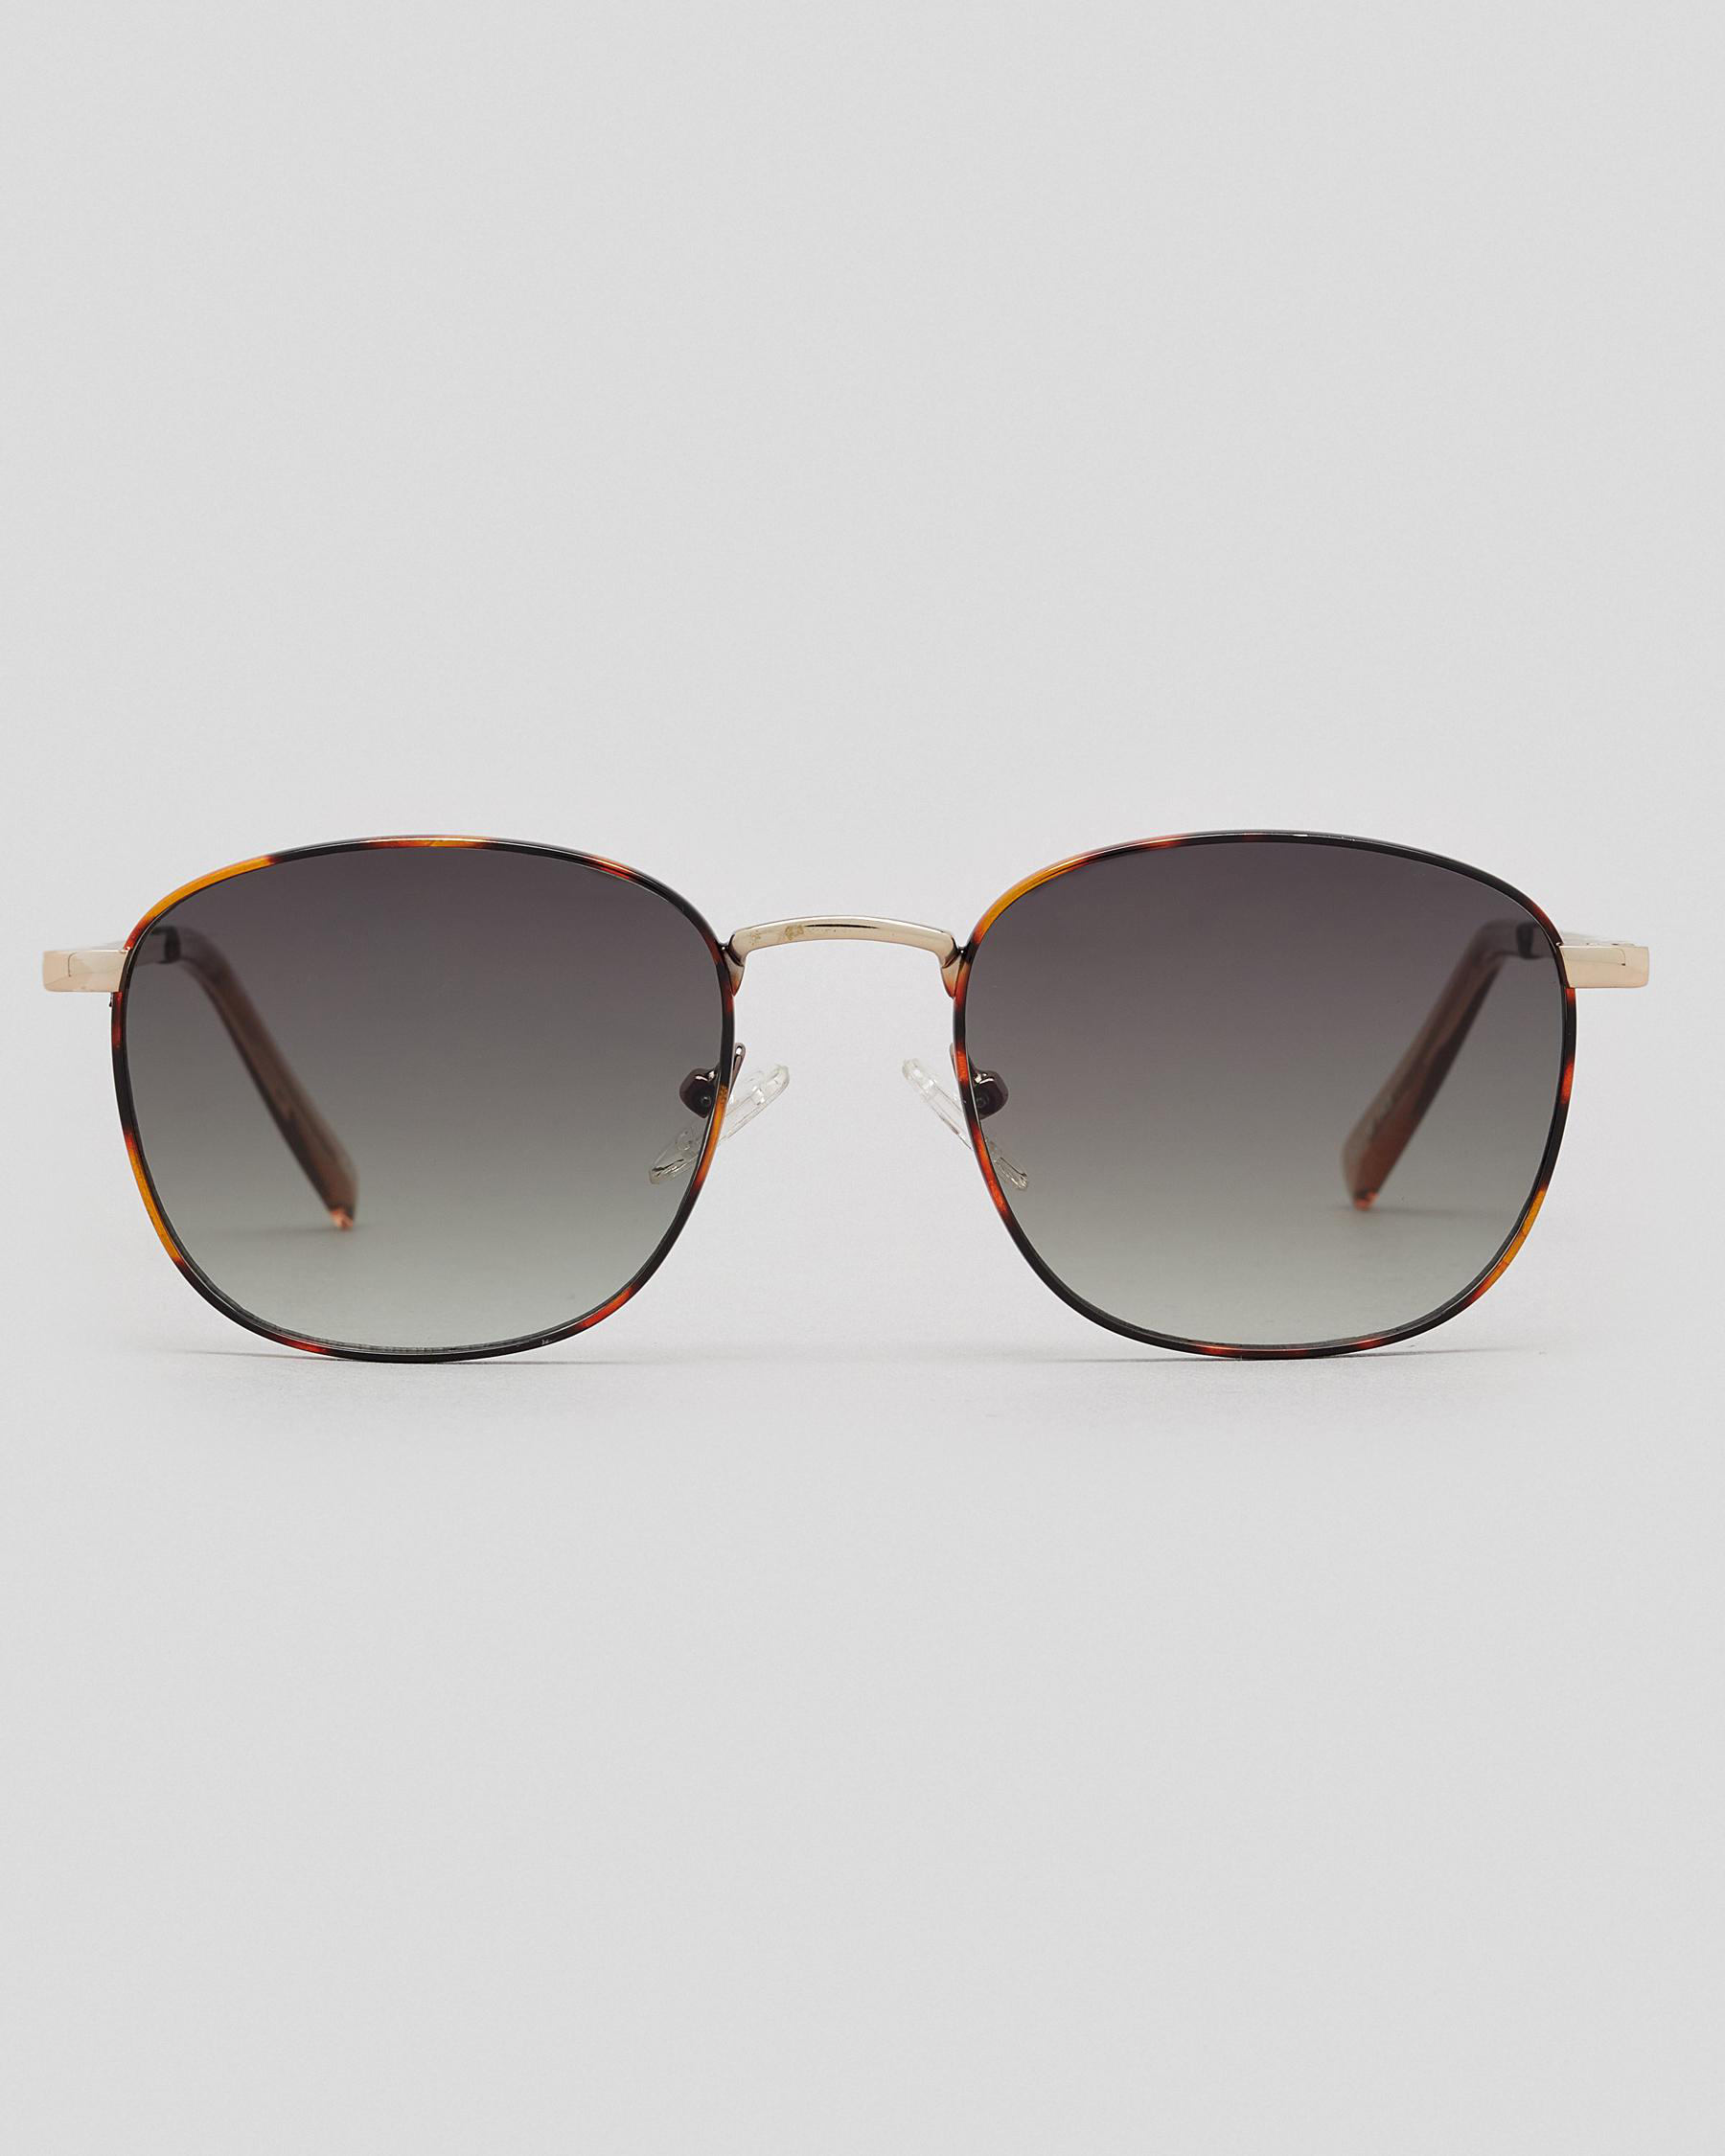 Le Specs Neptune Deux Sunglasses In Bright Gold Tort Fast Shipping And Easy Returns City 3476